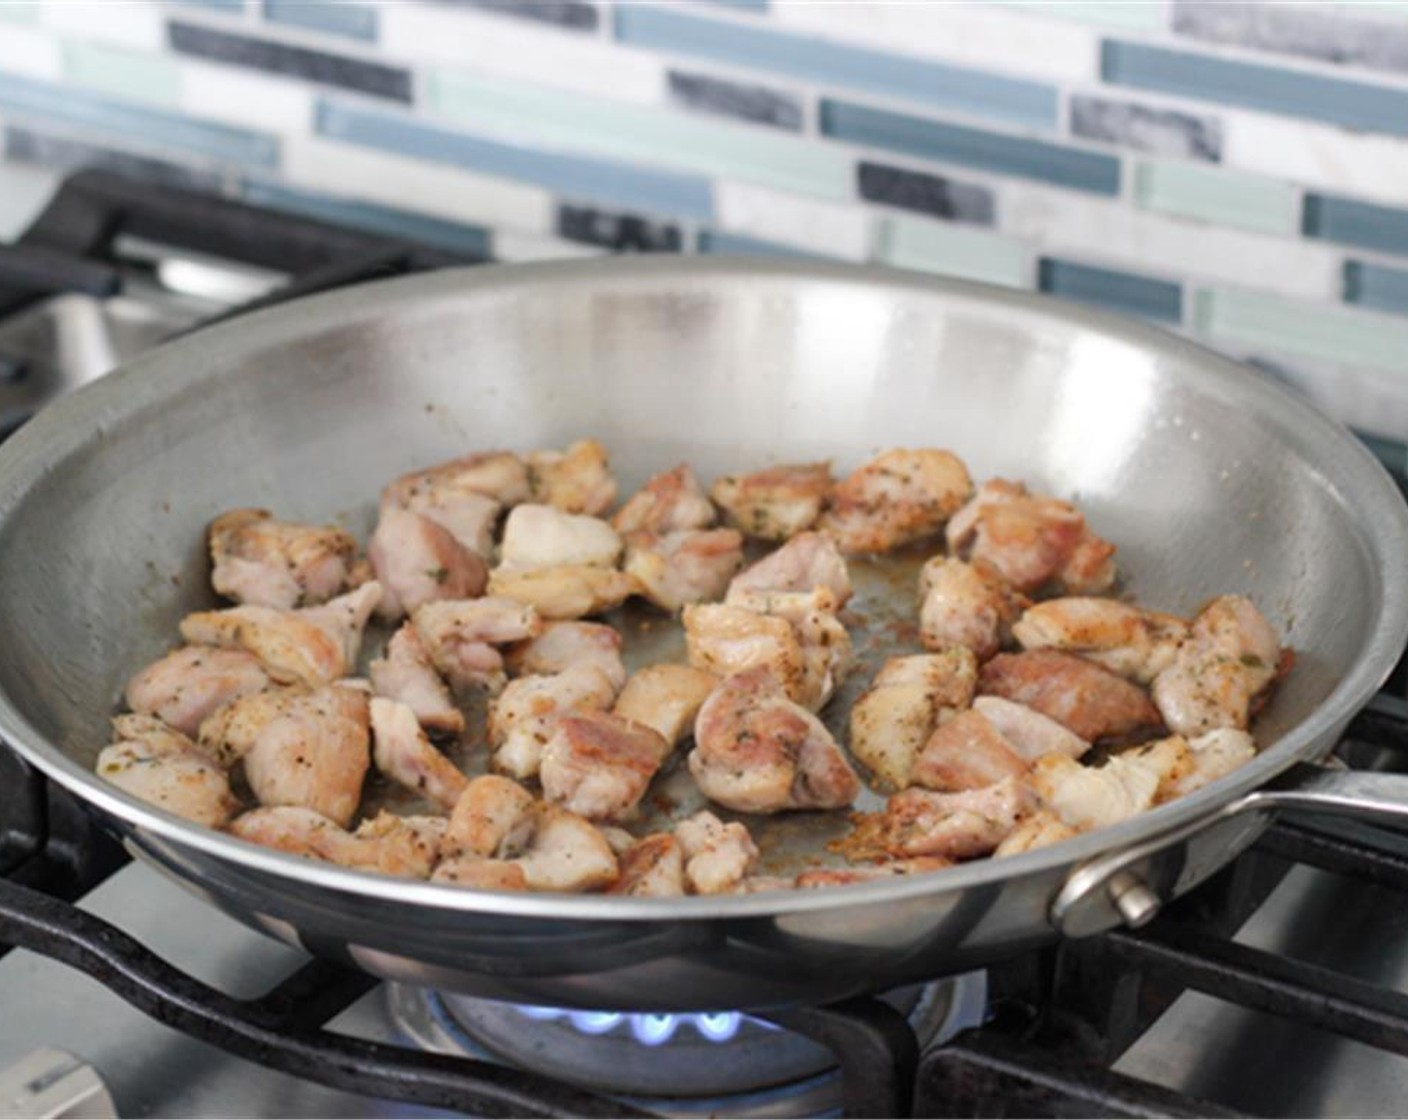 step 1 In large skillet, heat Oil (1 Tbsp) until shimmering. Add the Boneless, Skinless Chicken Thigh (1 lb) with Salt (to taste) and ground Ground Black Pepper (to taste) Cook on medium high until golden, 5 to 7 minutes. Set chicken aside, leaving oil in pan.